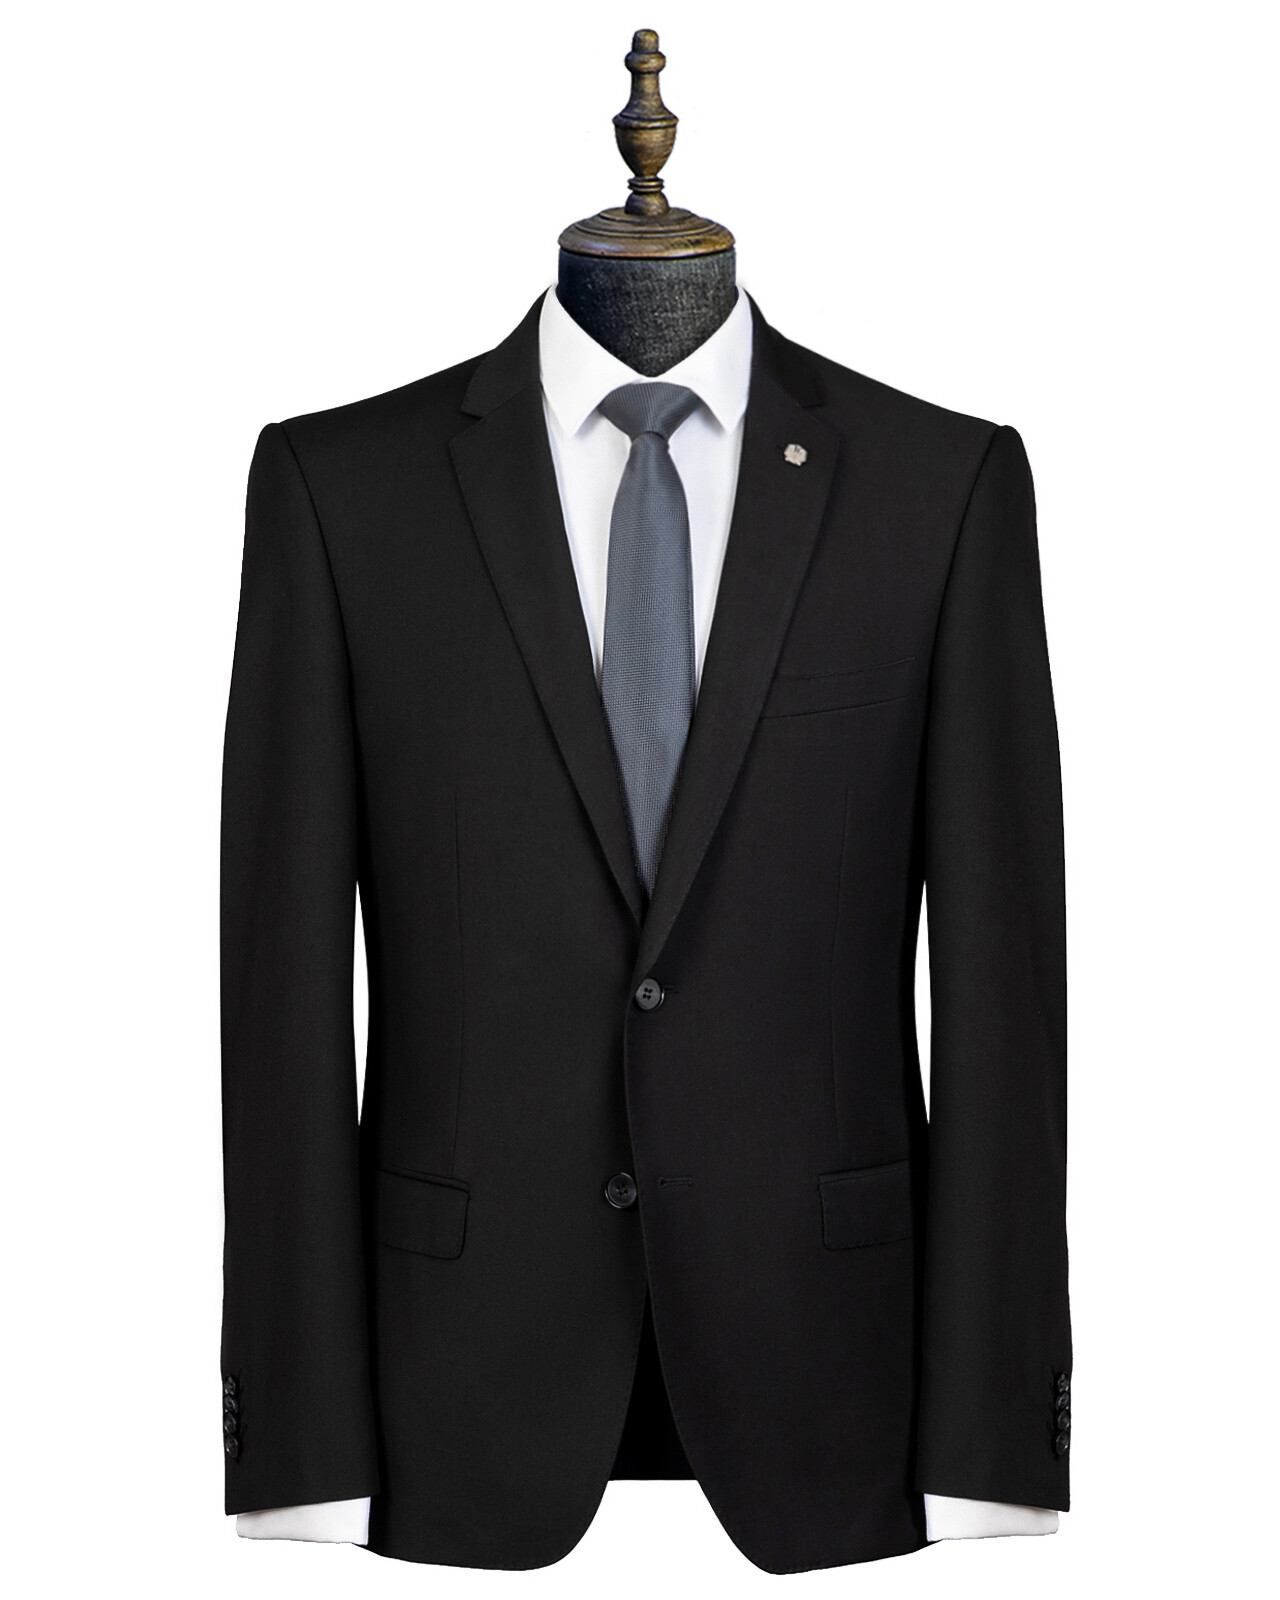 Entry level skinny-fit black suit made from a non-wool fabric